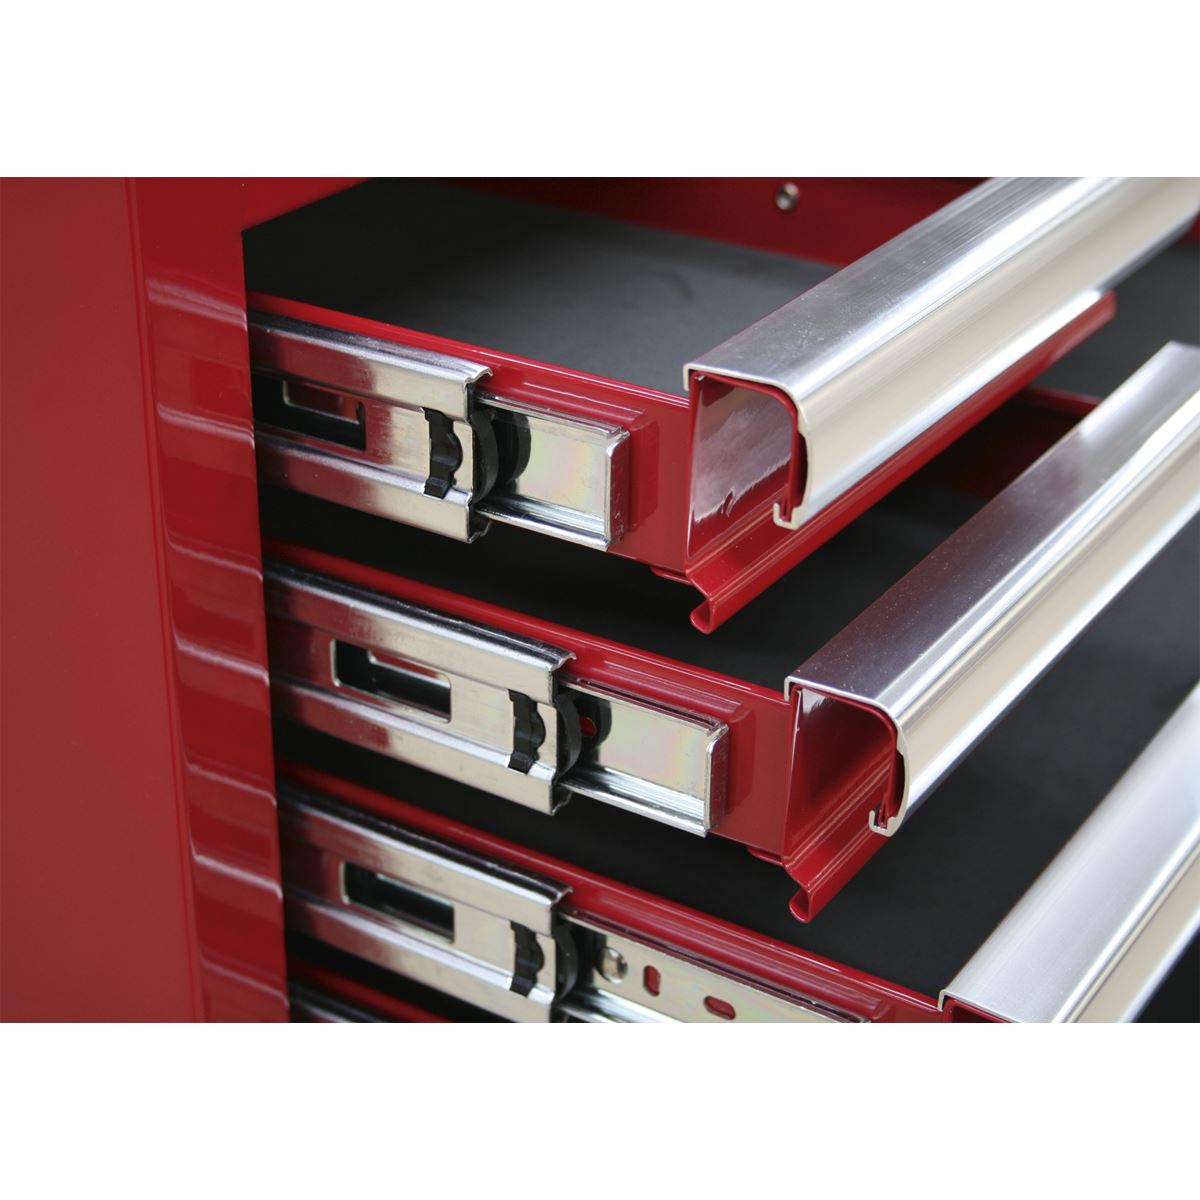 Sealey Superline Pro Mid-Box 2 Drawer with Ball-Bearing Slides - Red